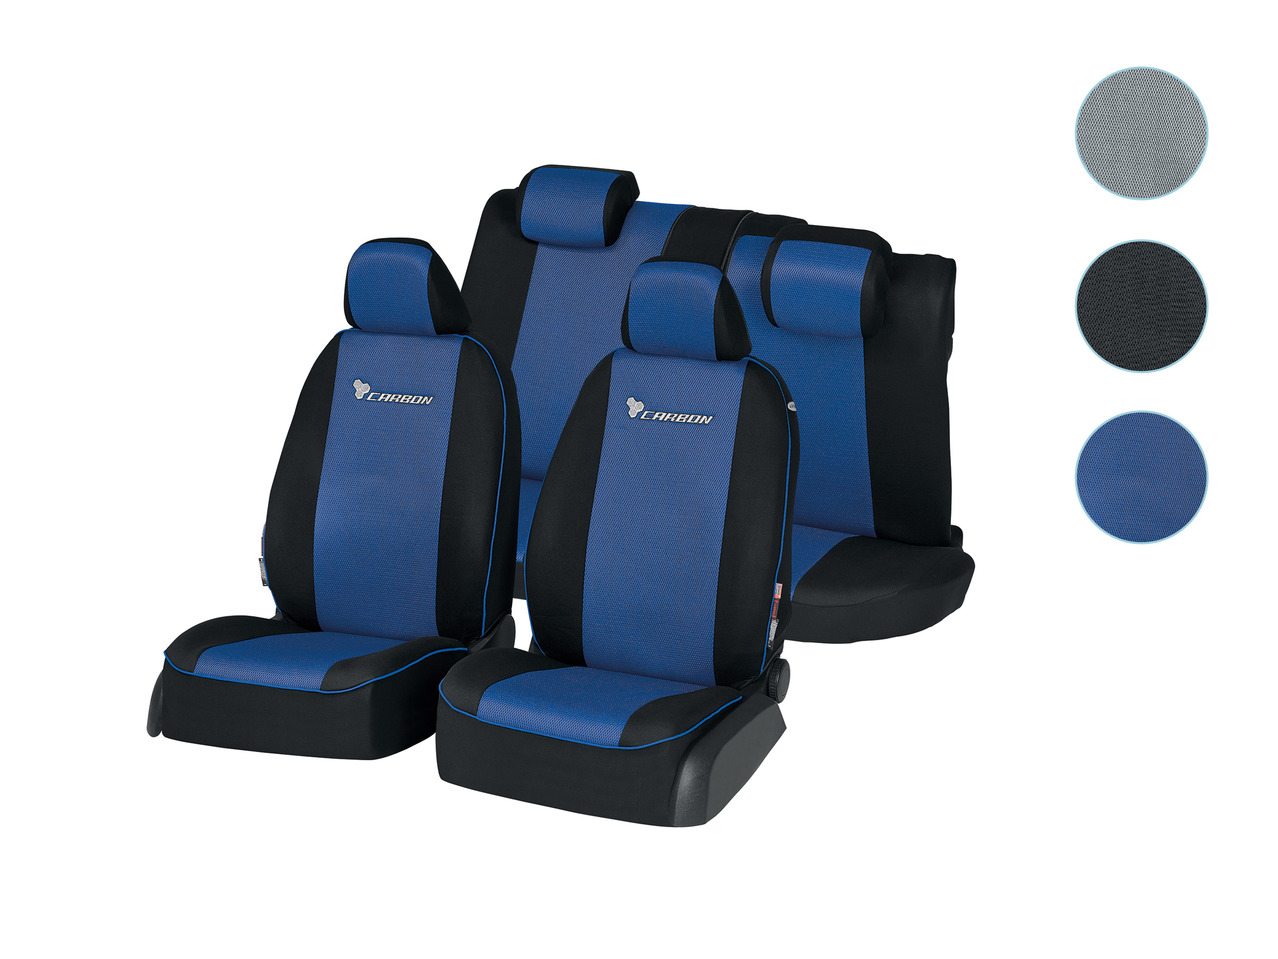 Ultimate Speed Carbon Car Seat Cover Set1